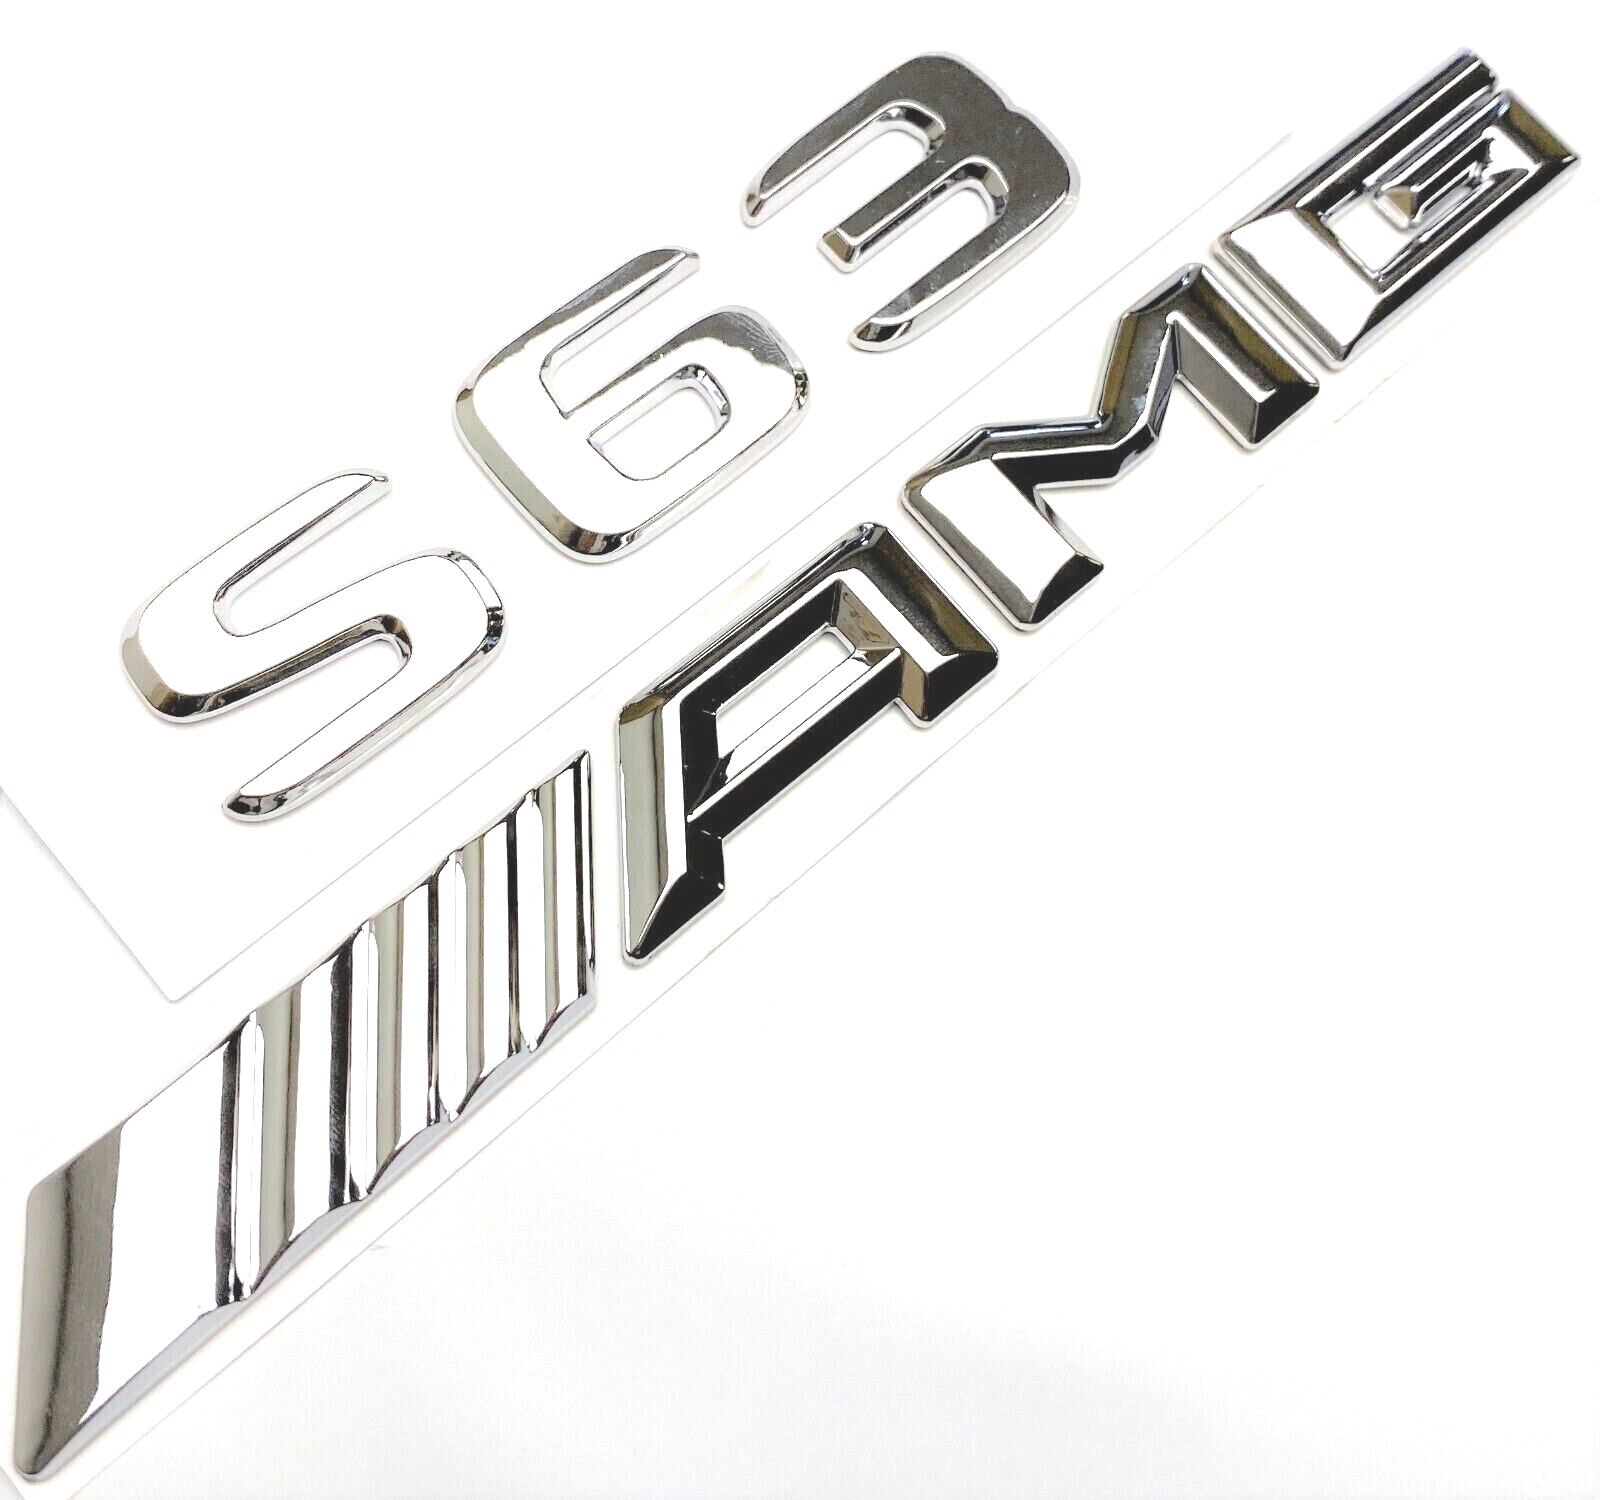 #2 CHROME S63+AMG FIT MERCEDES S63 REAR TRUNK EMBLEM BADGE NAMEPLATE DECAL